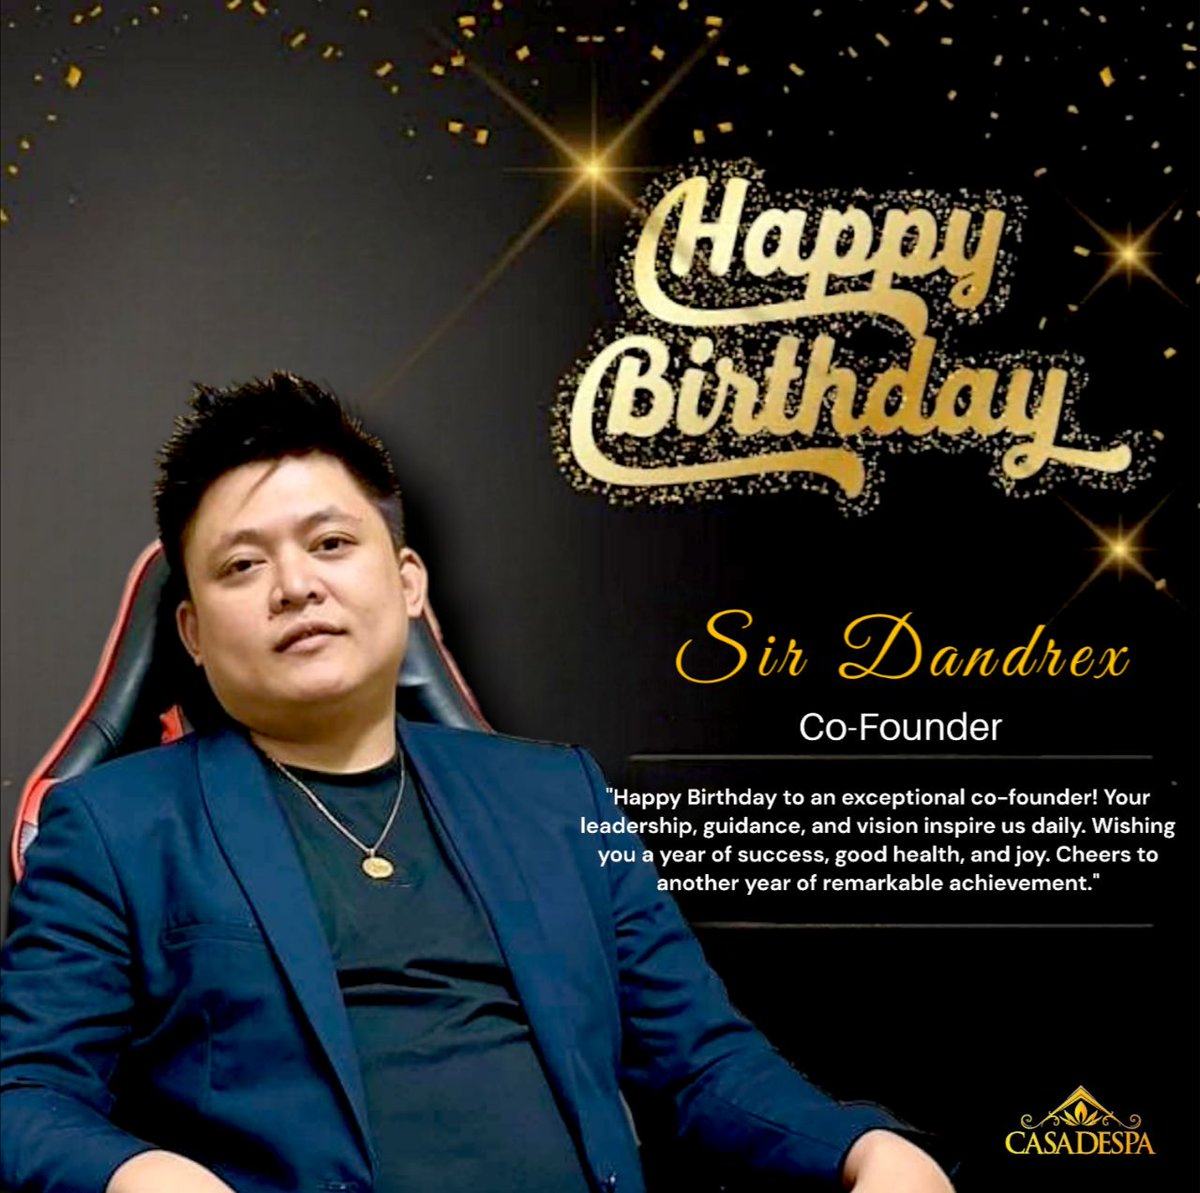 Happy birthday Sir Rex, Co-founder of Casadespa! 🎉 Success, health, and happiness is what we wish on your birthday. ❤️ #casadespa